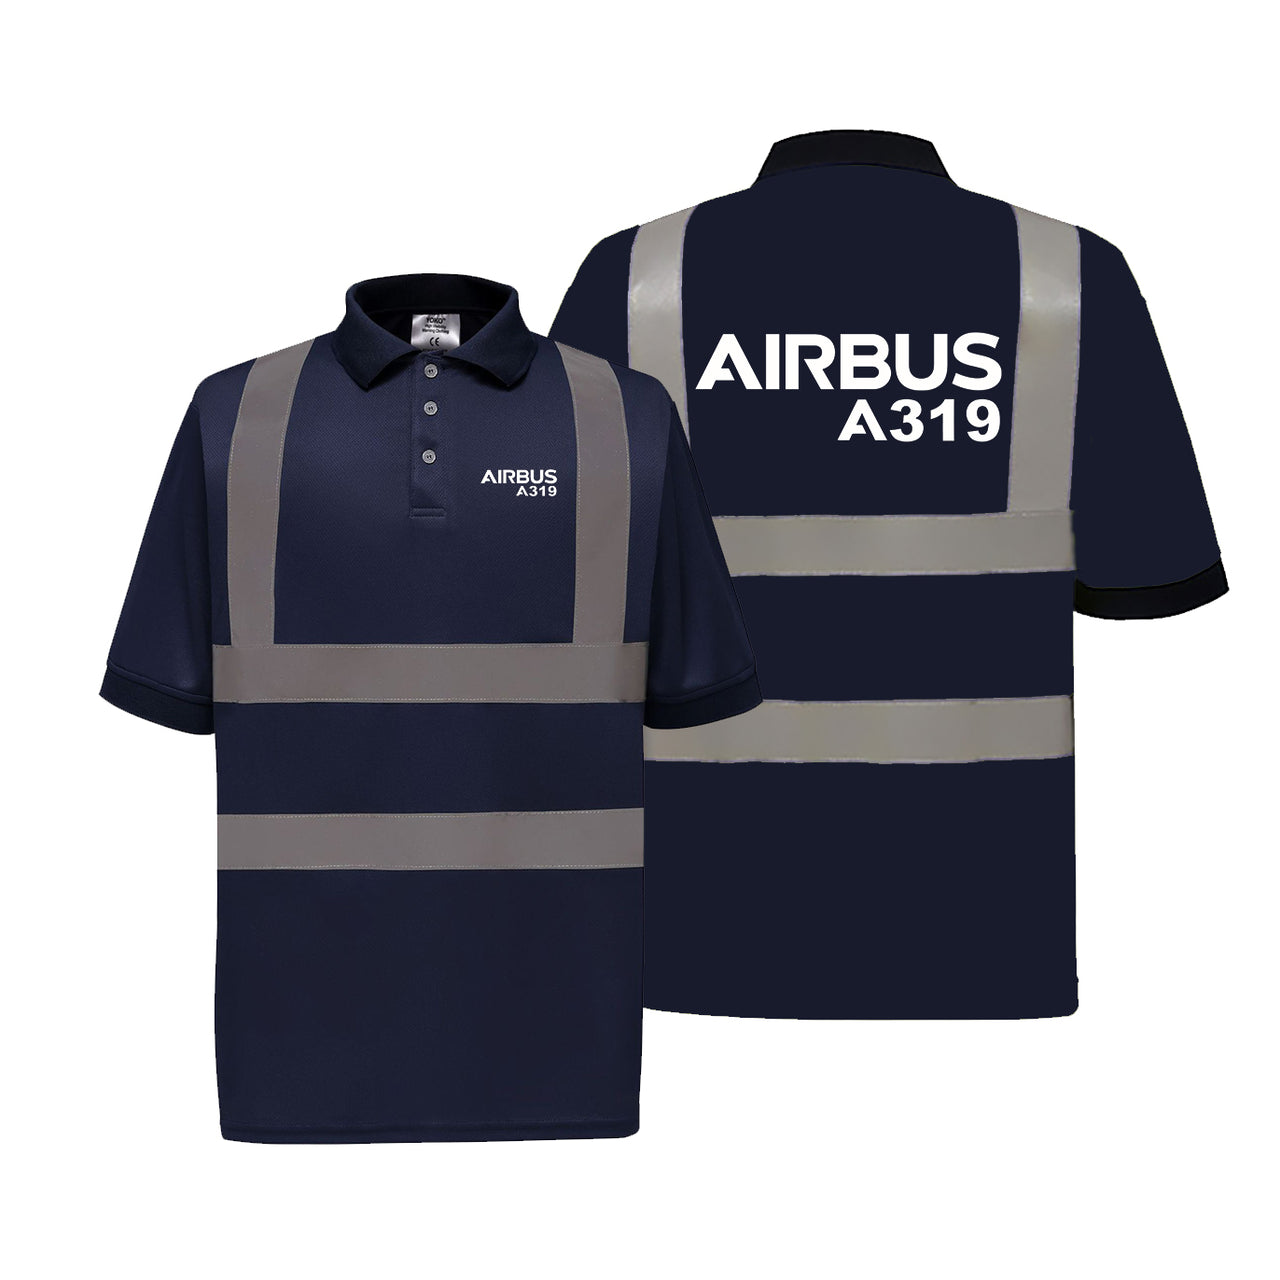 Airbus A319 & Text Designed Reflective Polo T-Shirts